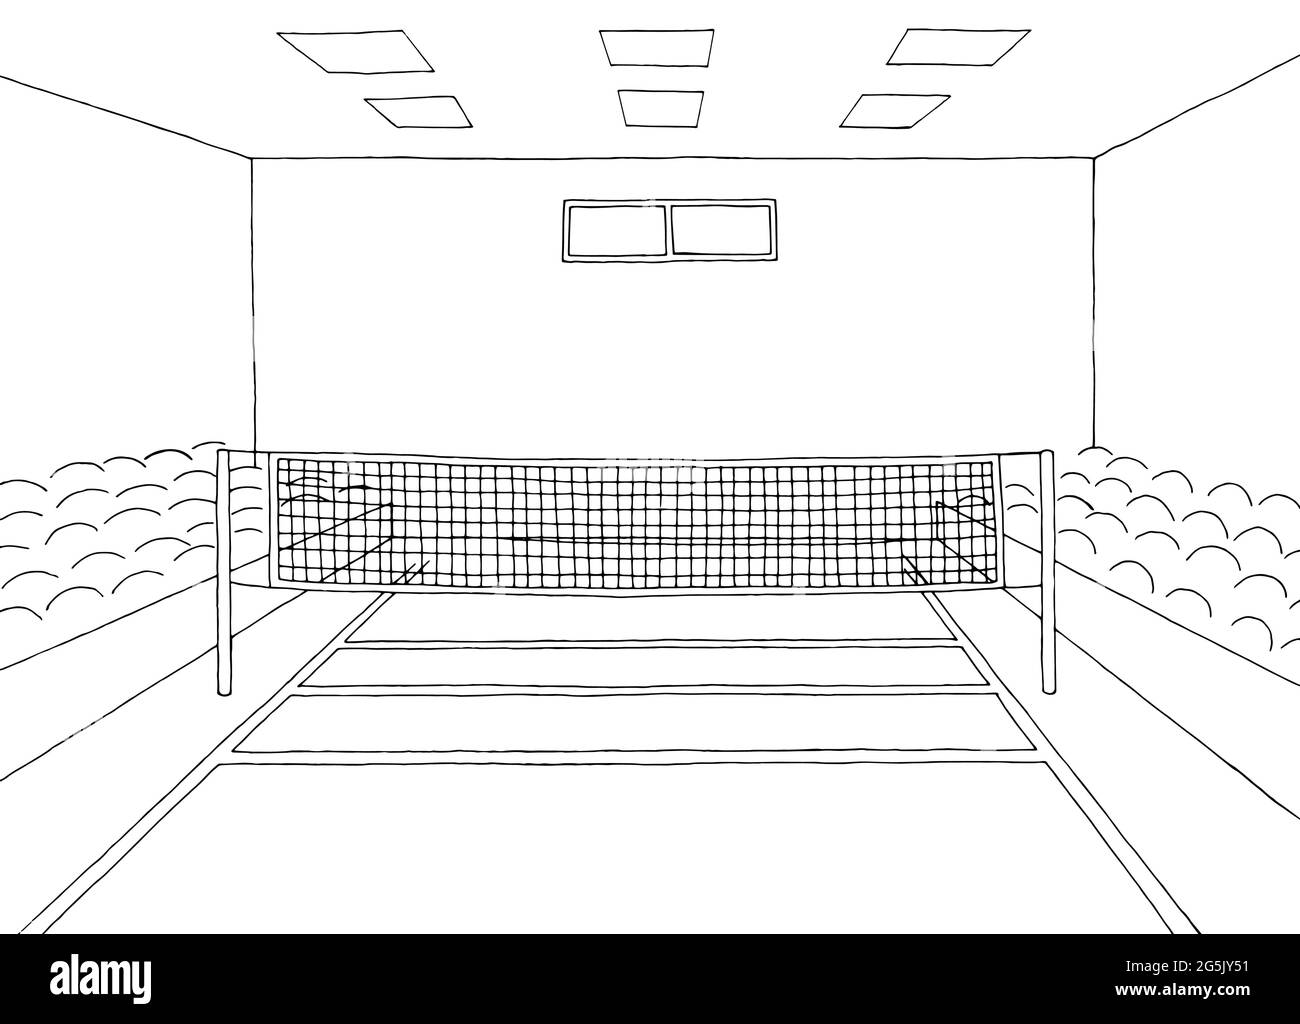 Volleyball gym sport indoors graphic black white sketch illustration vector Stock Vector